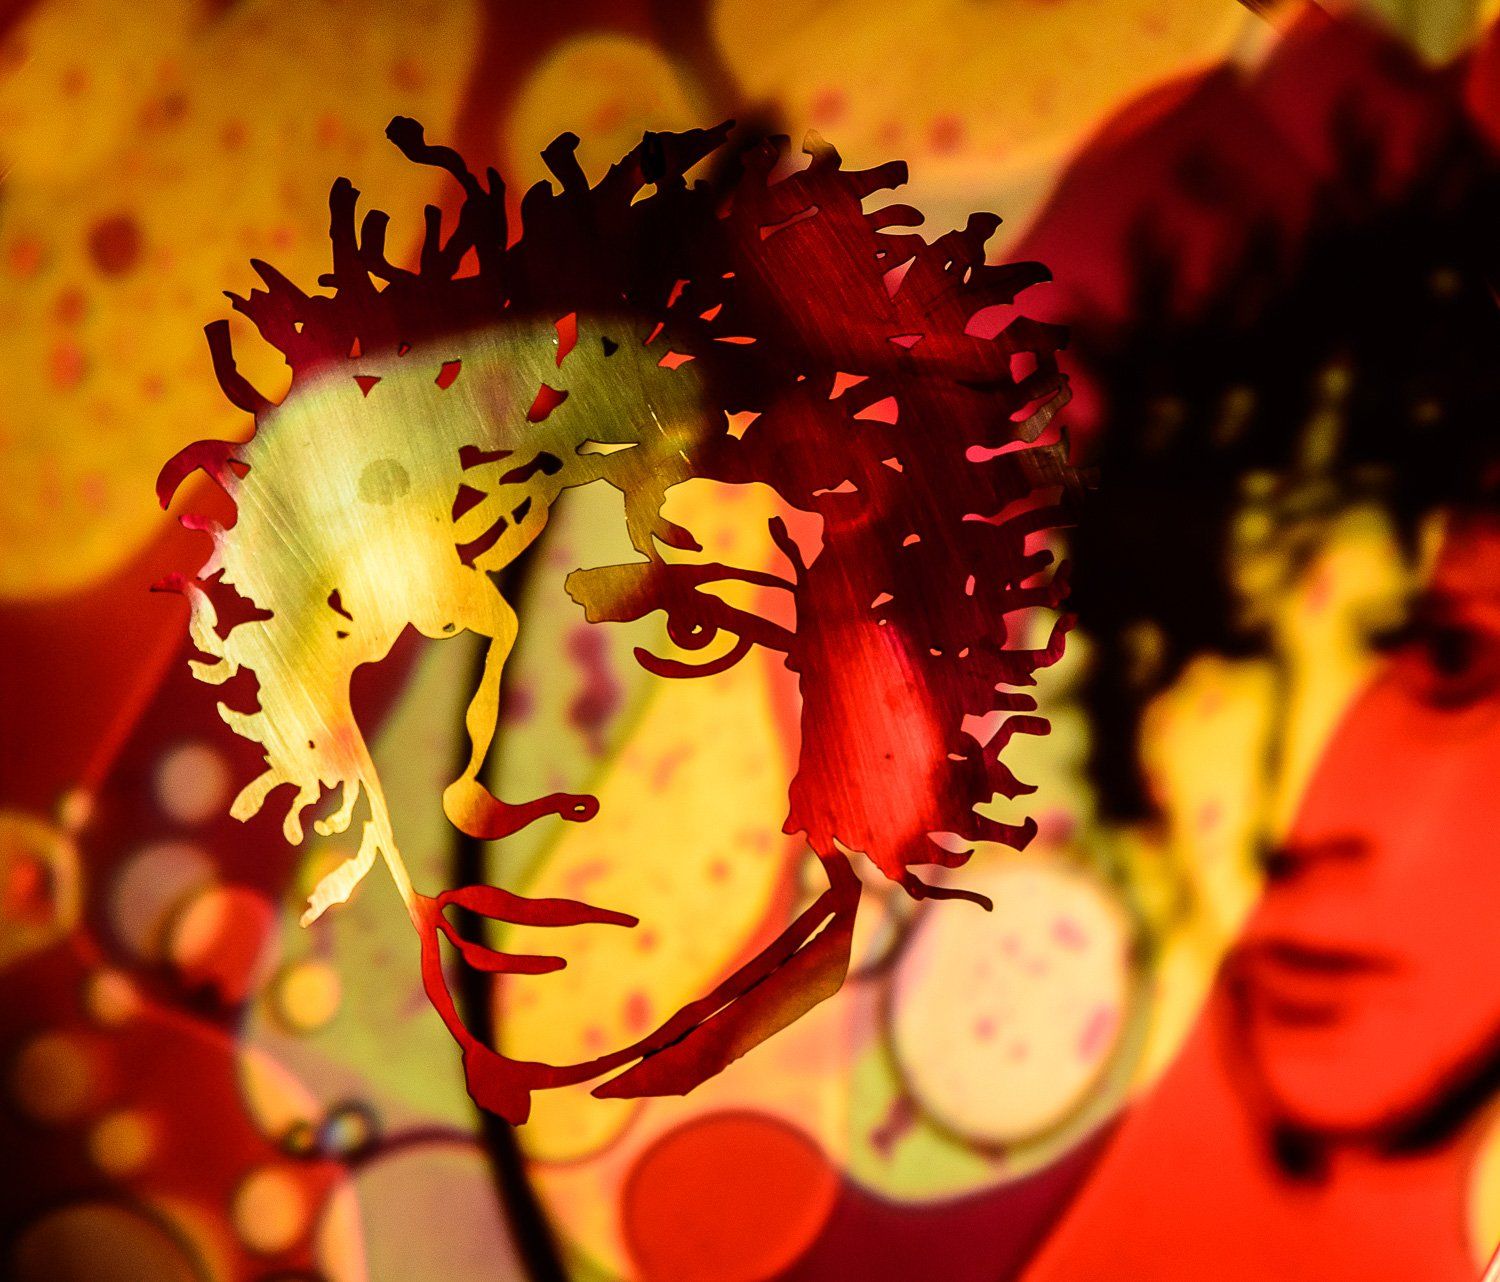 Syd Barrett by Spadge Hopkins in his Rock Faces series.